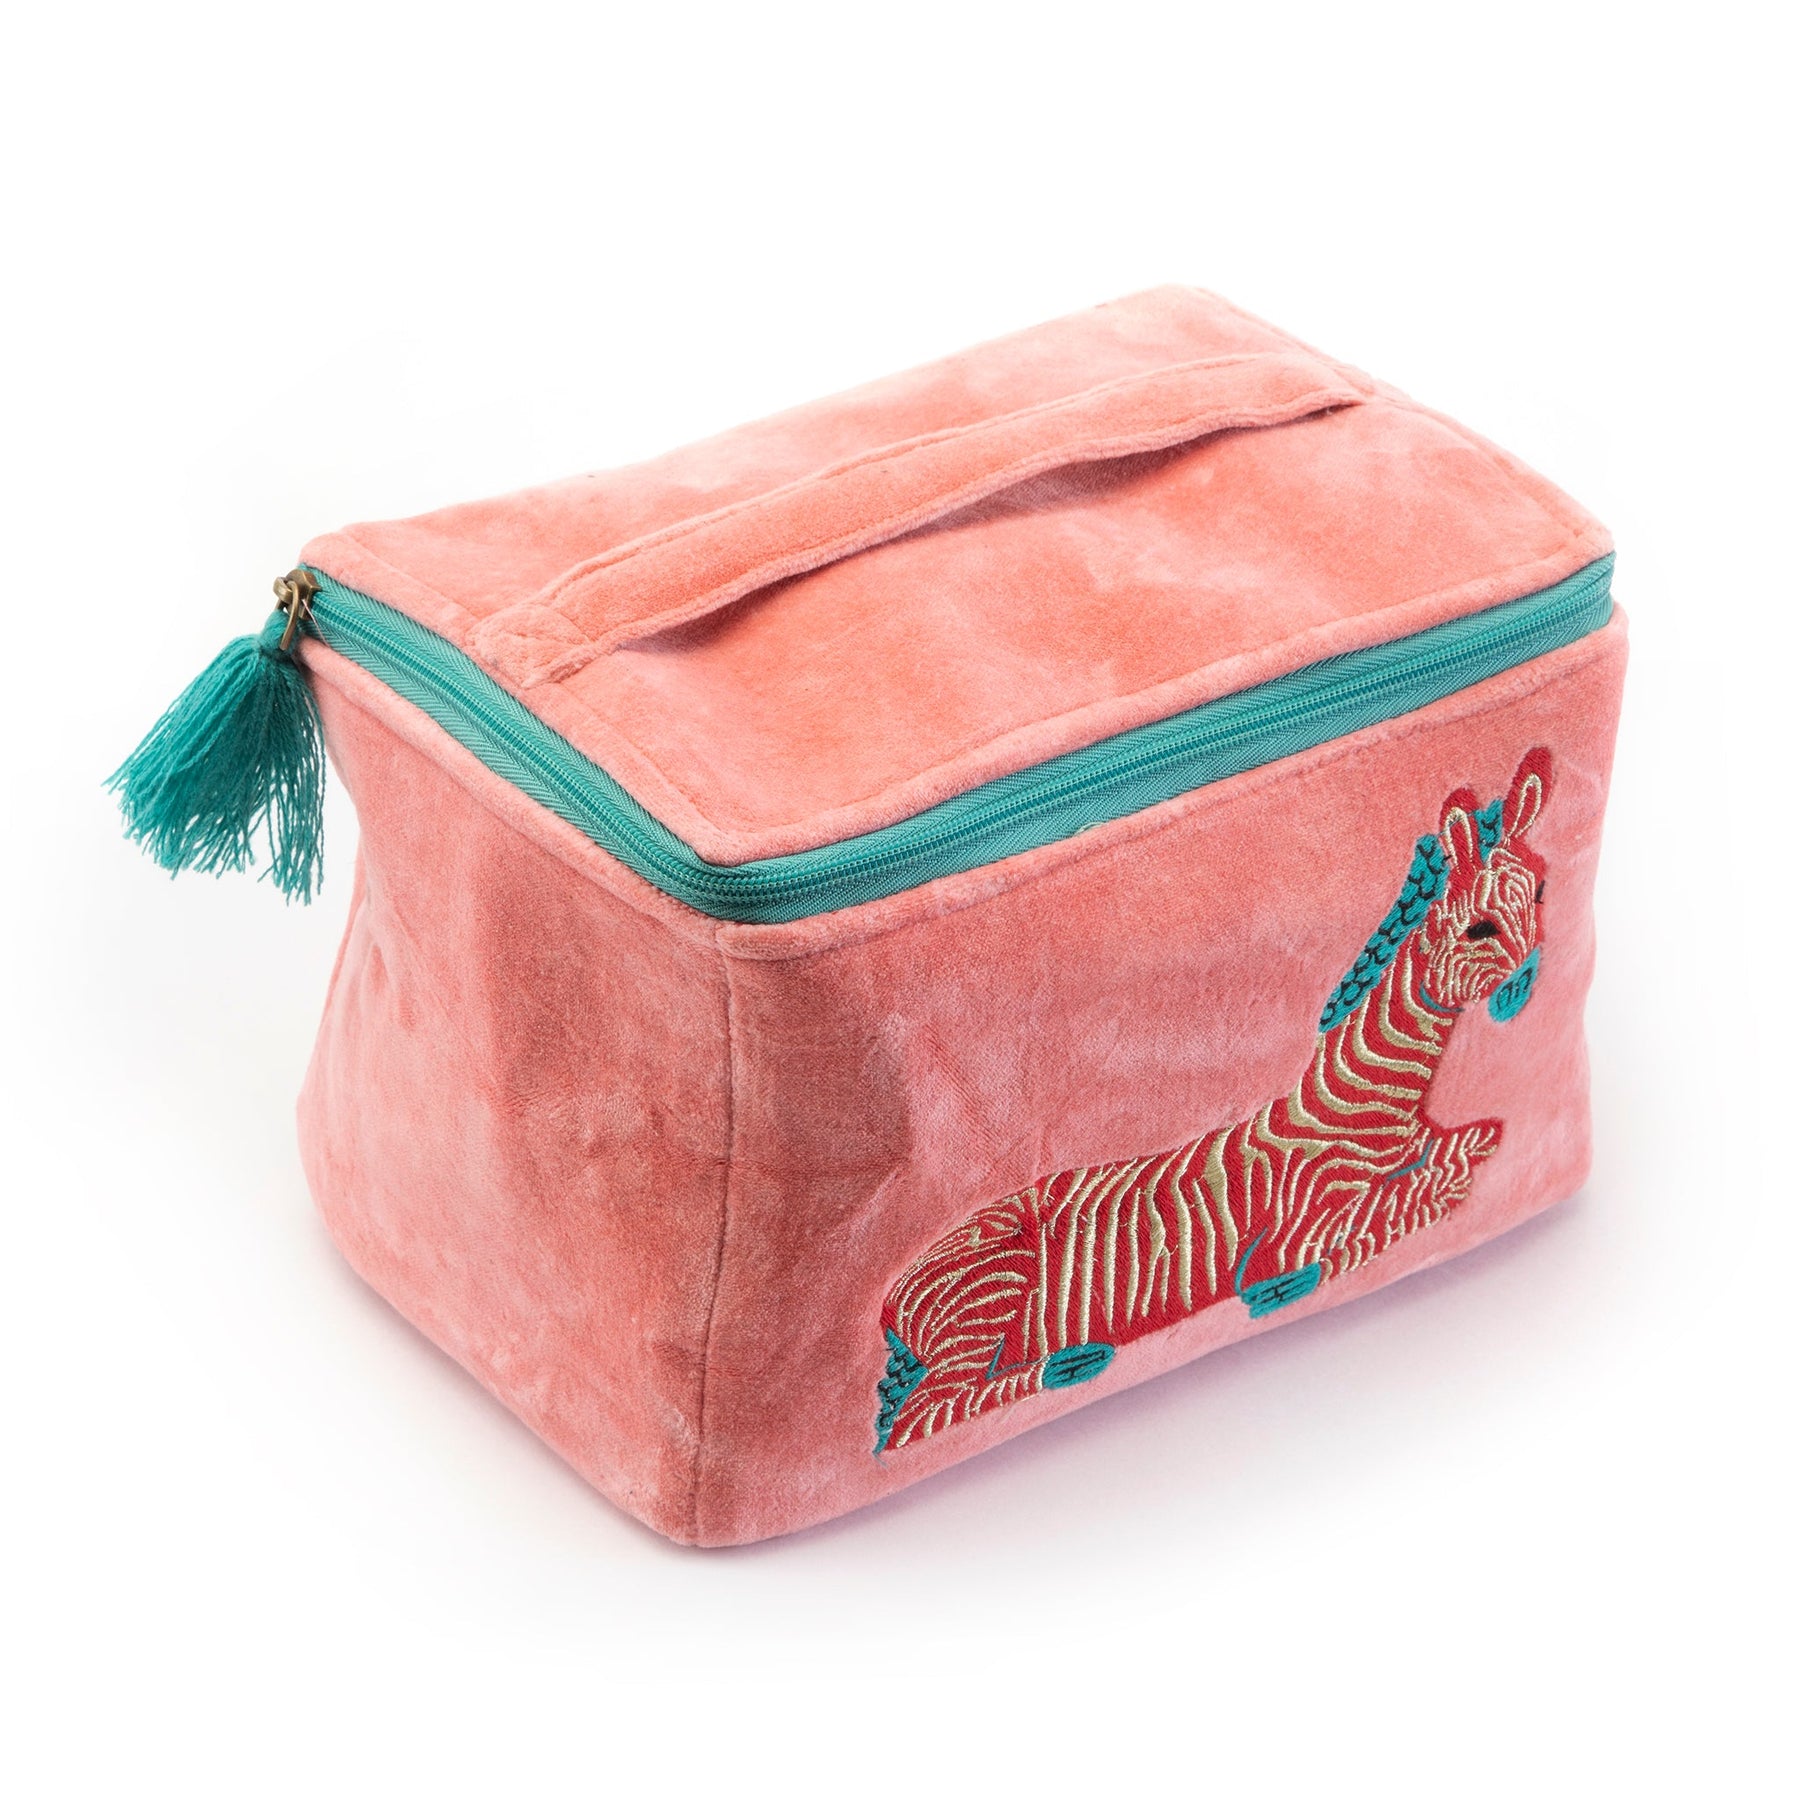 Embroidered Cosmetic Bag-Pink Zebra